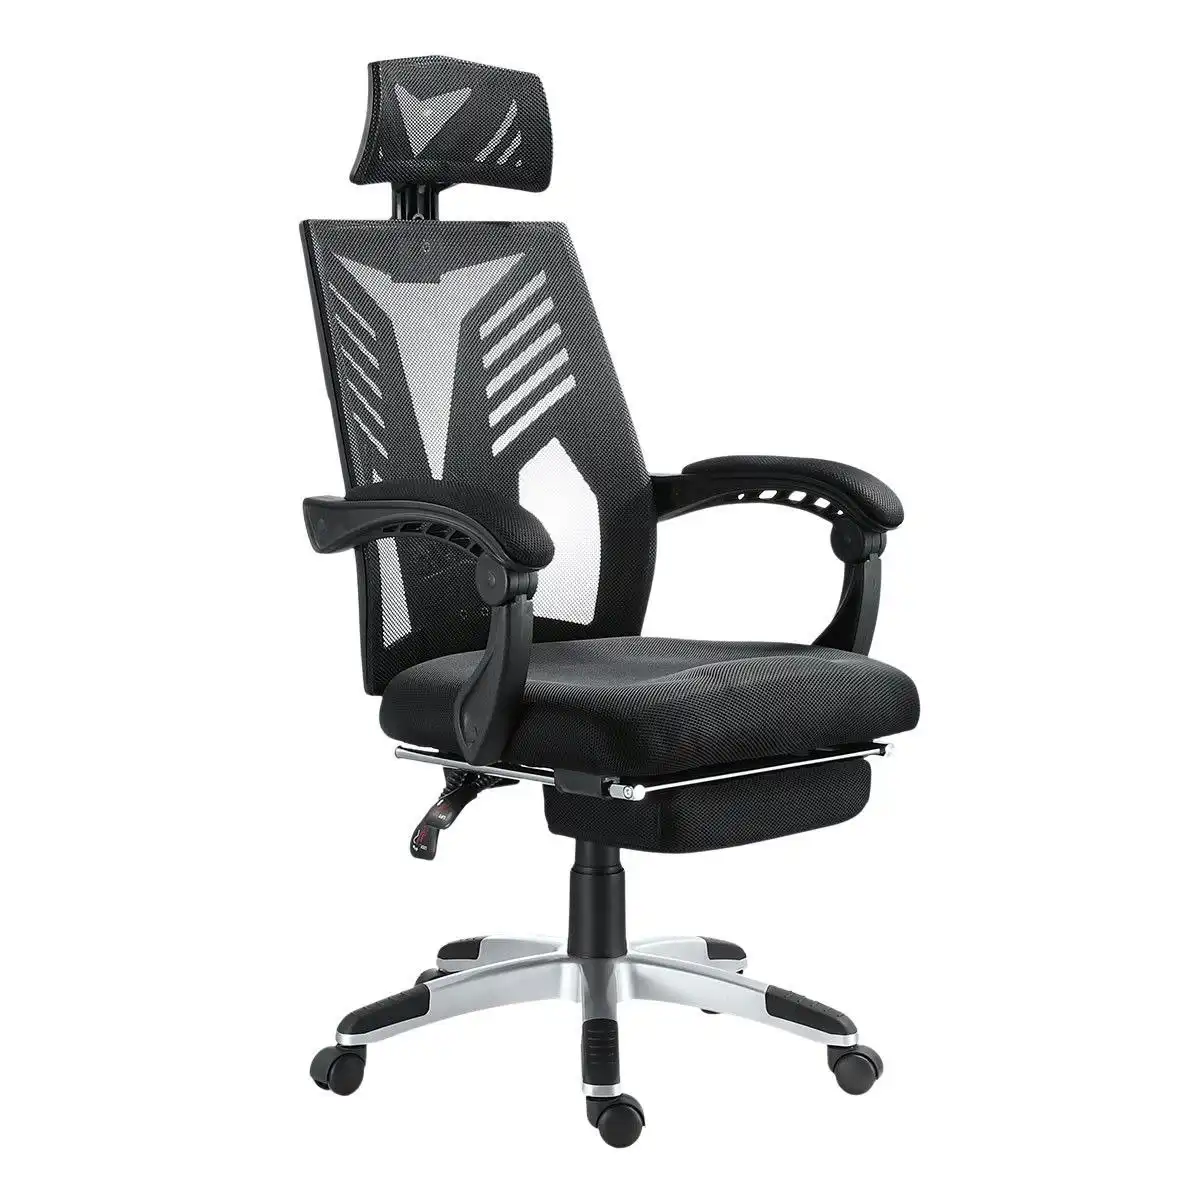 Ausway Executive High Back Mesh Office Computer Chair with Retractable Footrest